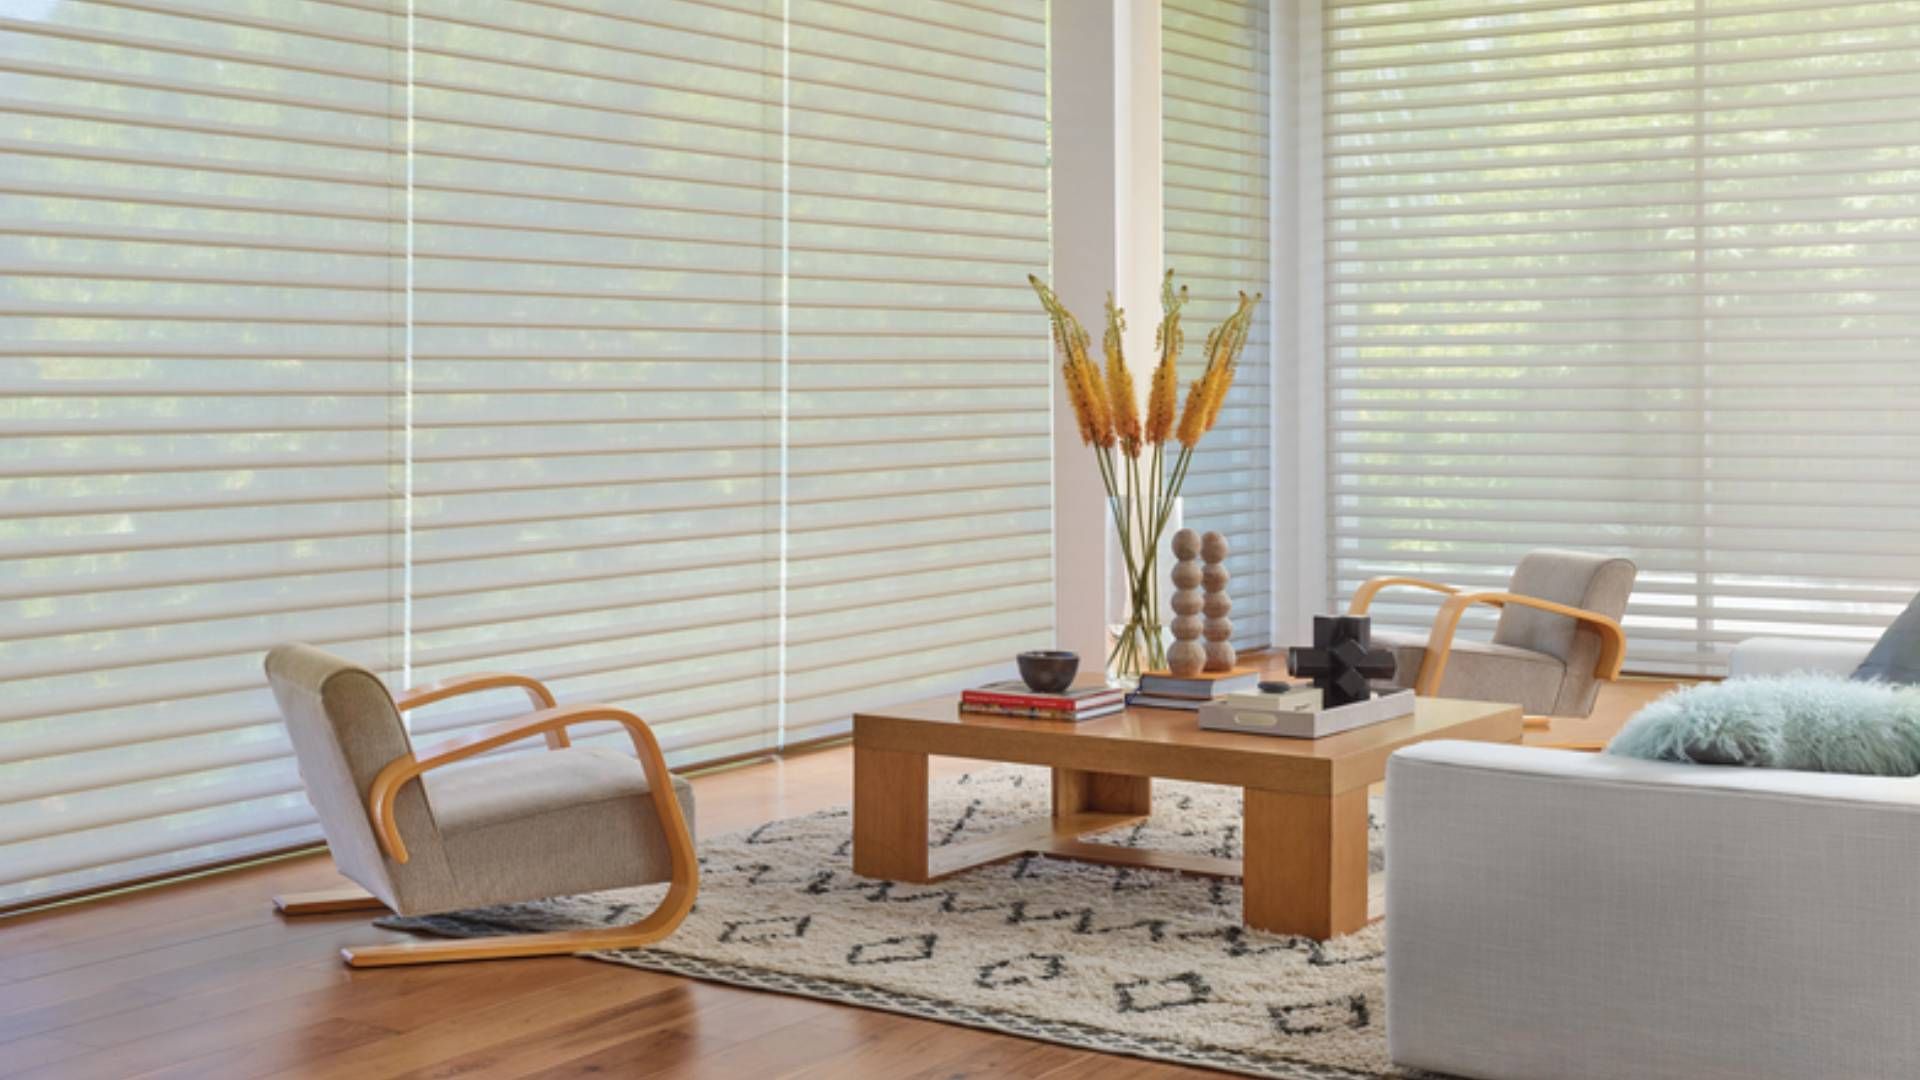 Bright and open living room equipped with Hunter Douglas blinds and PowerView® Automation at Window